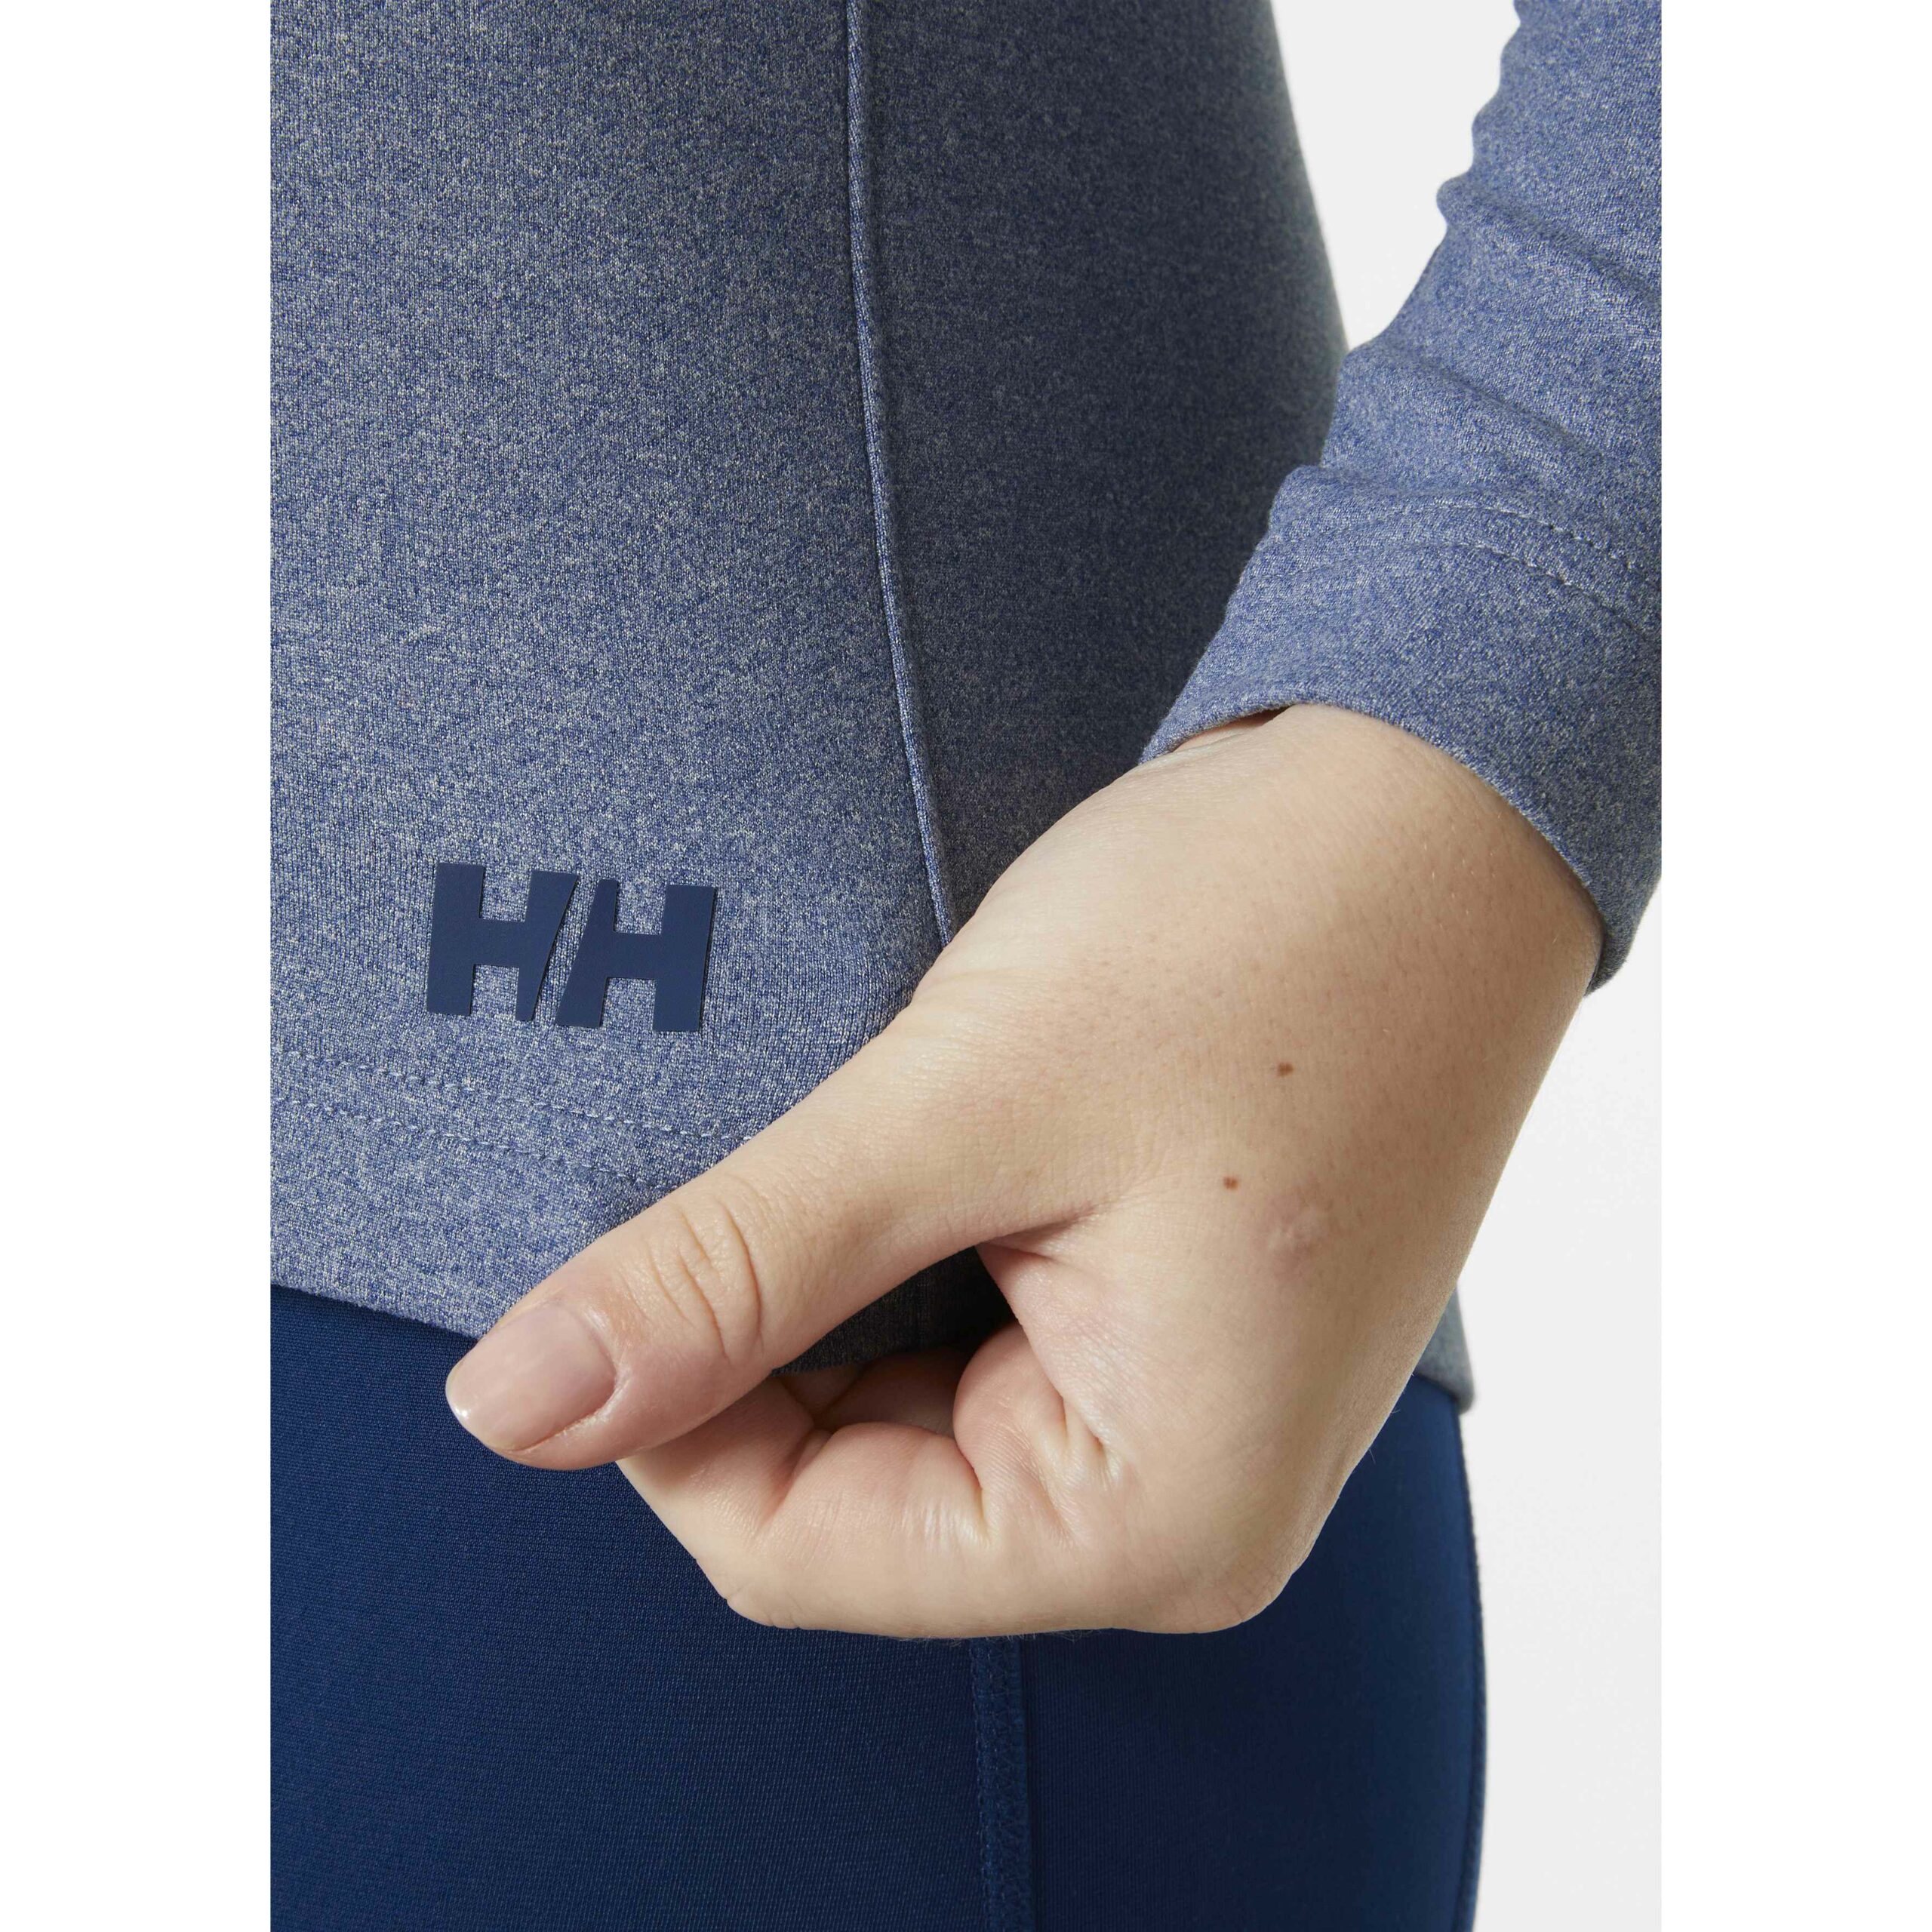 Helly Hansen Clothing Collection for Women